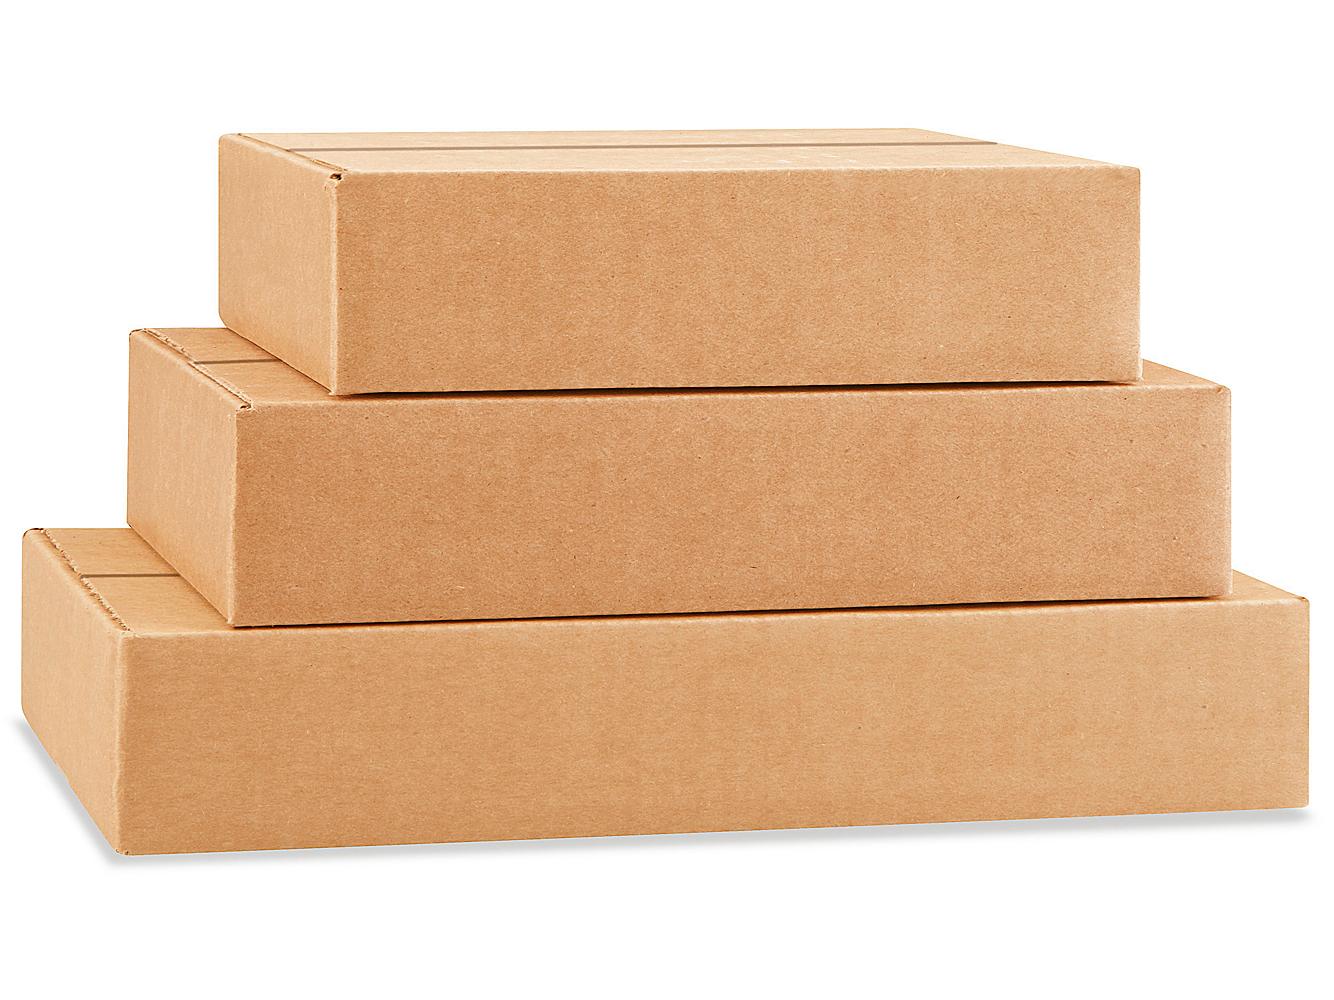 Flat Shipping Boxes, Flat Boxes, Rectangle Boxes in Stock - ULINE